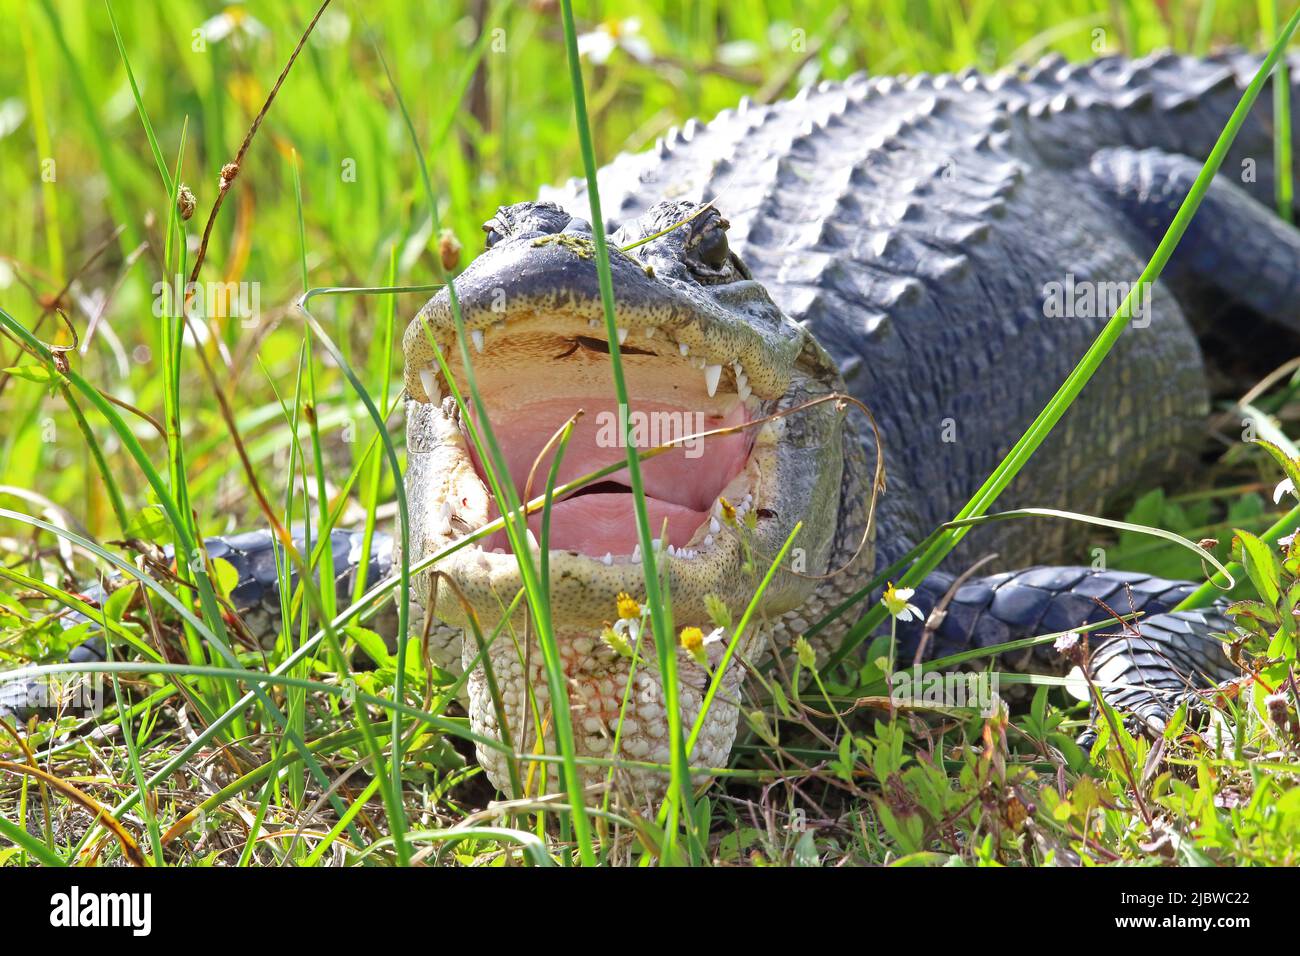 Large American alligator with open mouth on the grass Stock Photo